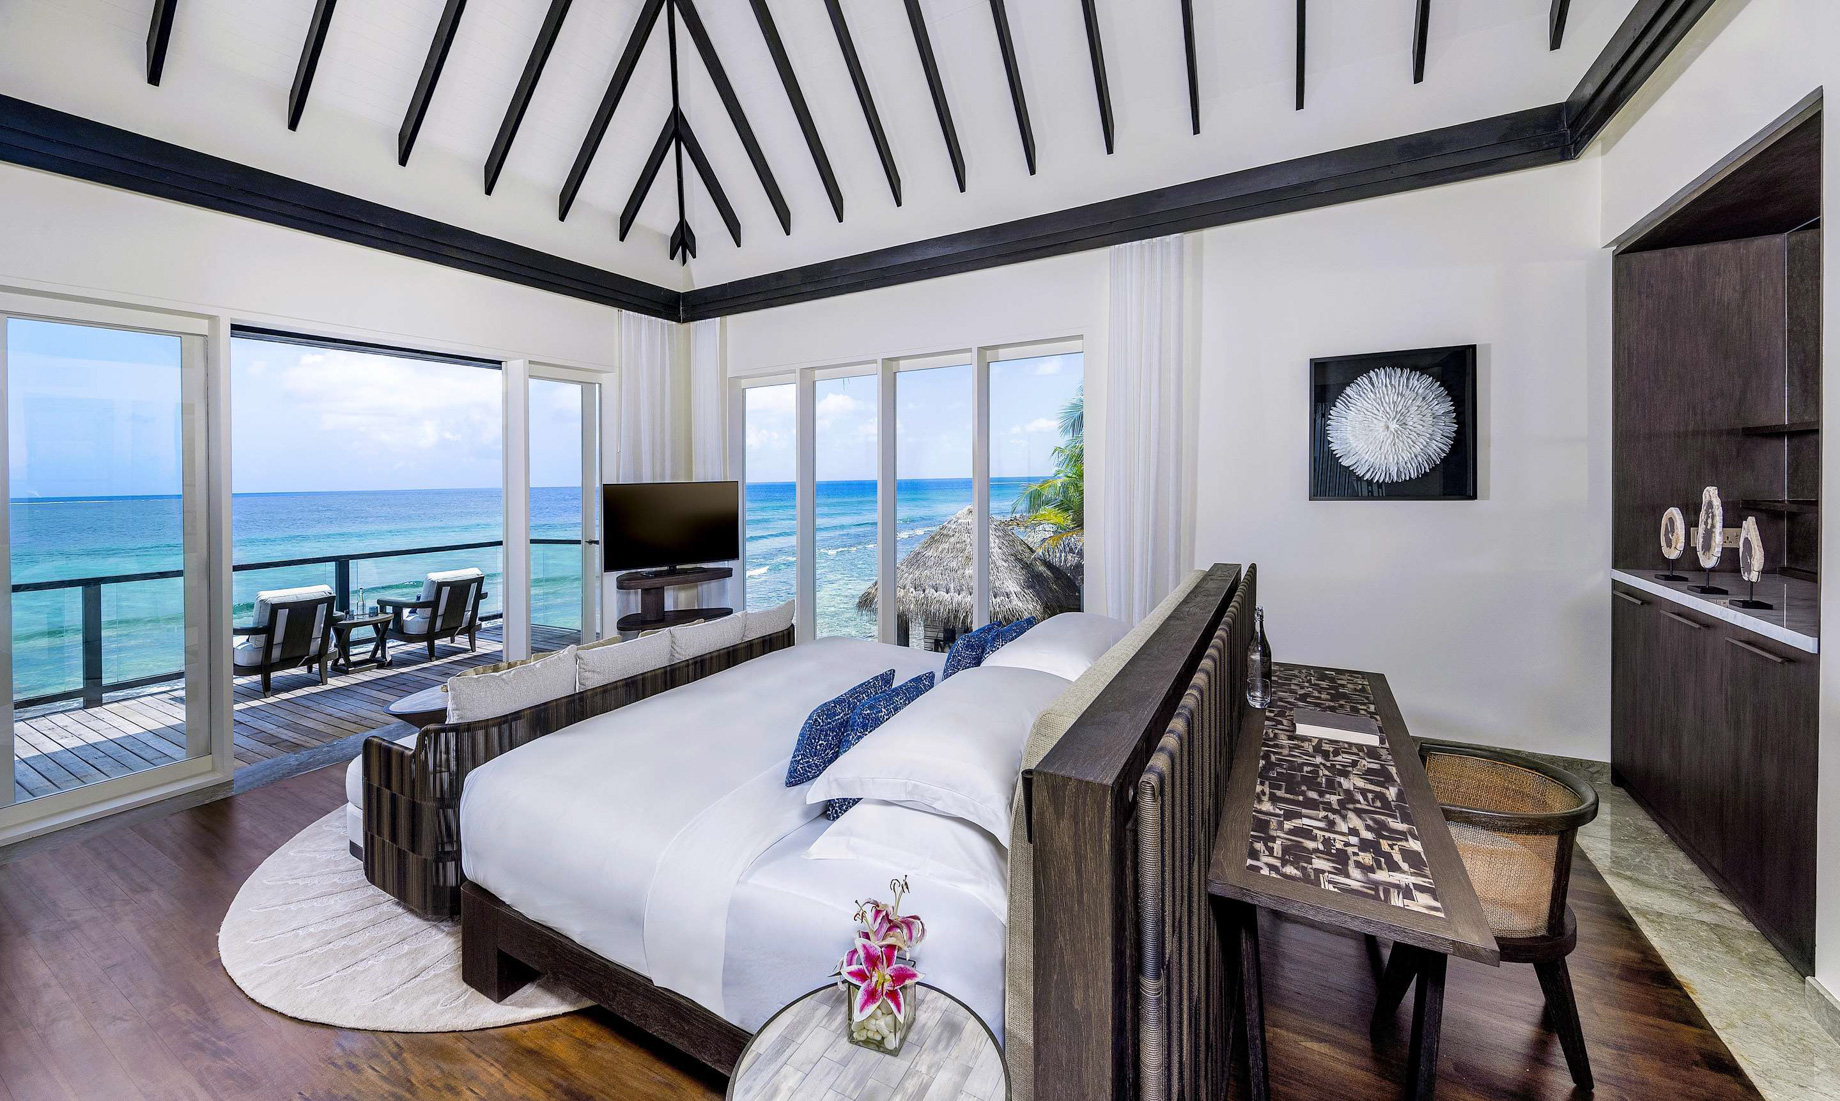 Naladhu Private Island Maldives Resort – South Male Atoll, Maldives – Two Bedroom Beach Pool Residence Bedroom Ocean View